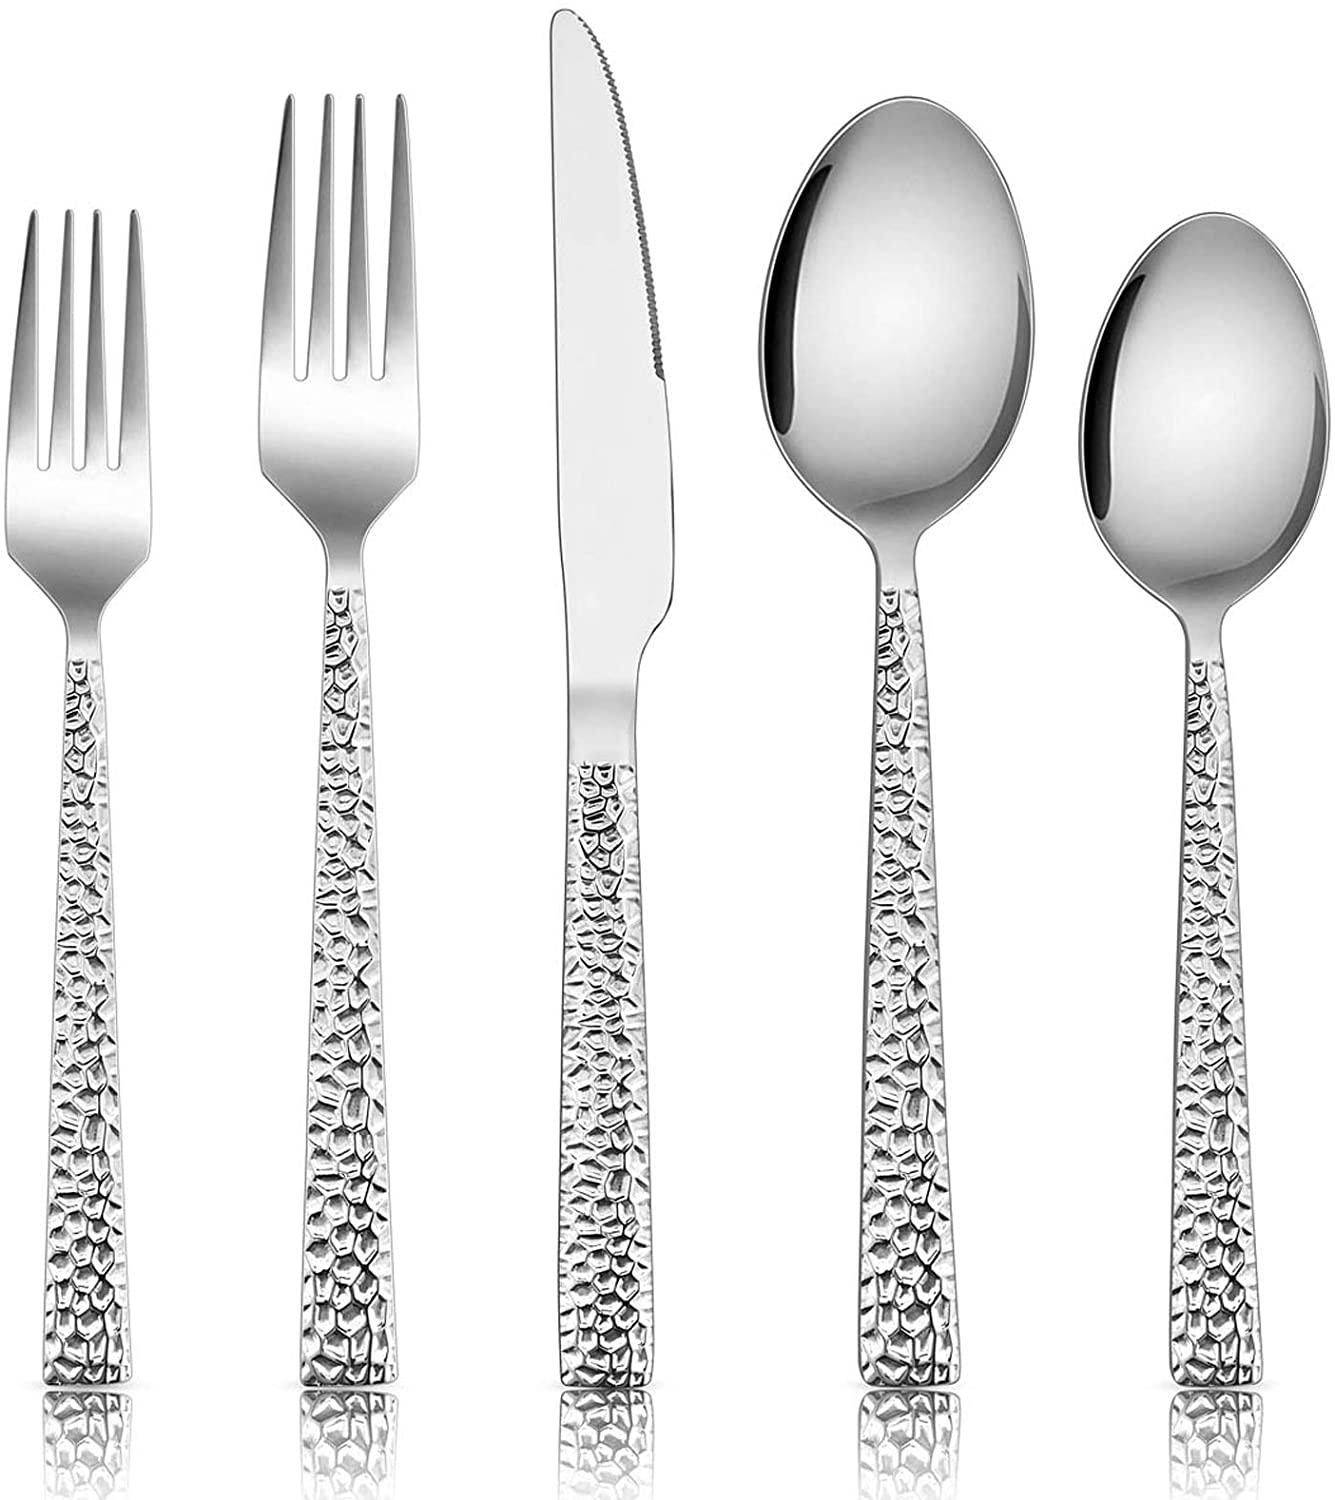 Hiware 48-Piece Silverware Set with Steak Knives for 8, Stainless Steel Flatware  Cutlery Set For Home Kitchen Restaurant Hotel, Mirror Polished, Dishwasher  Safe 